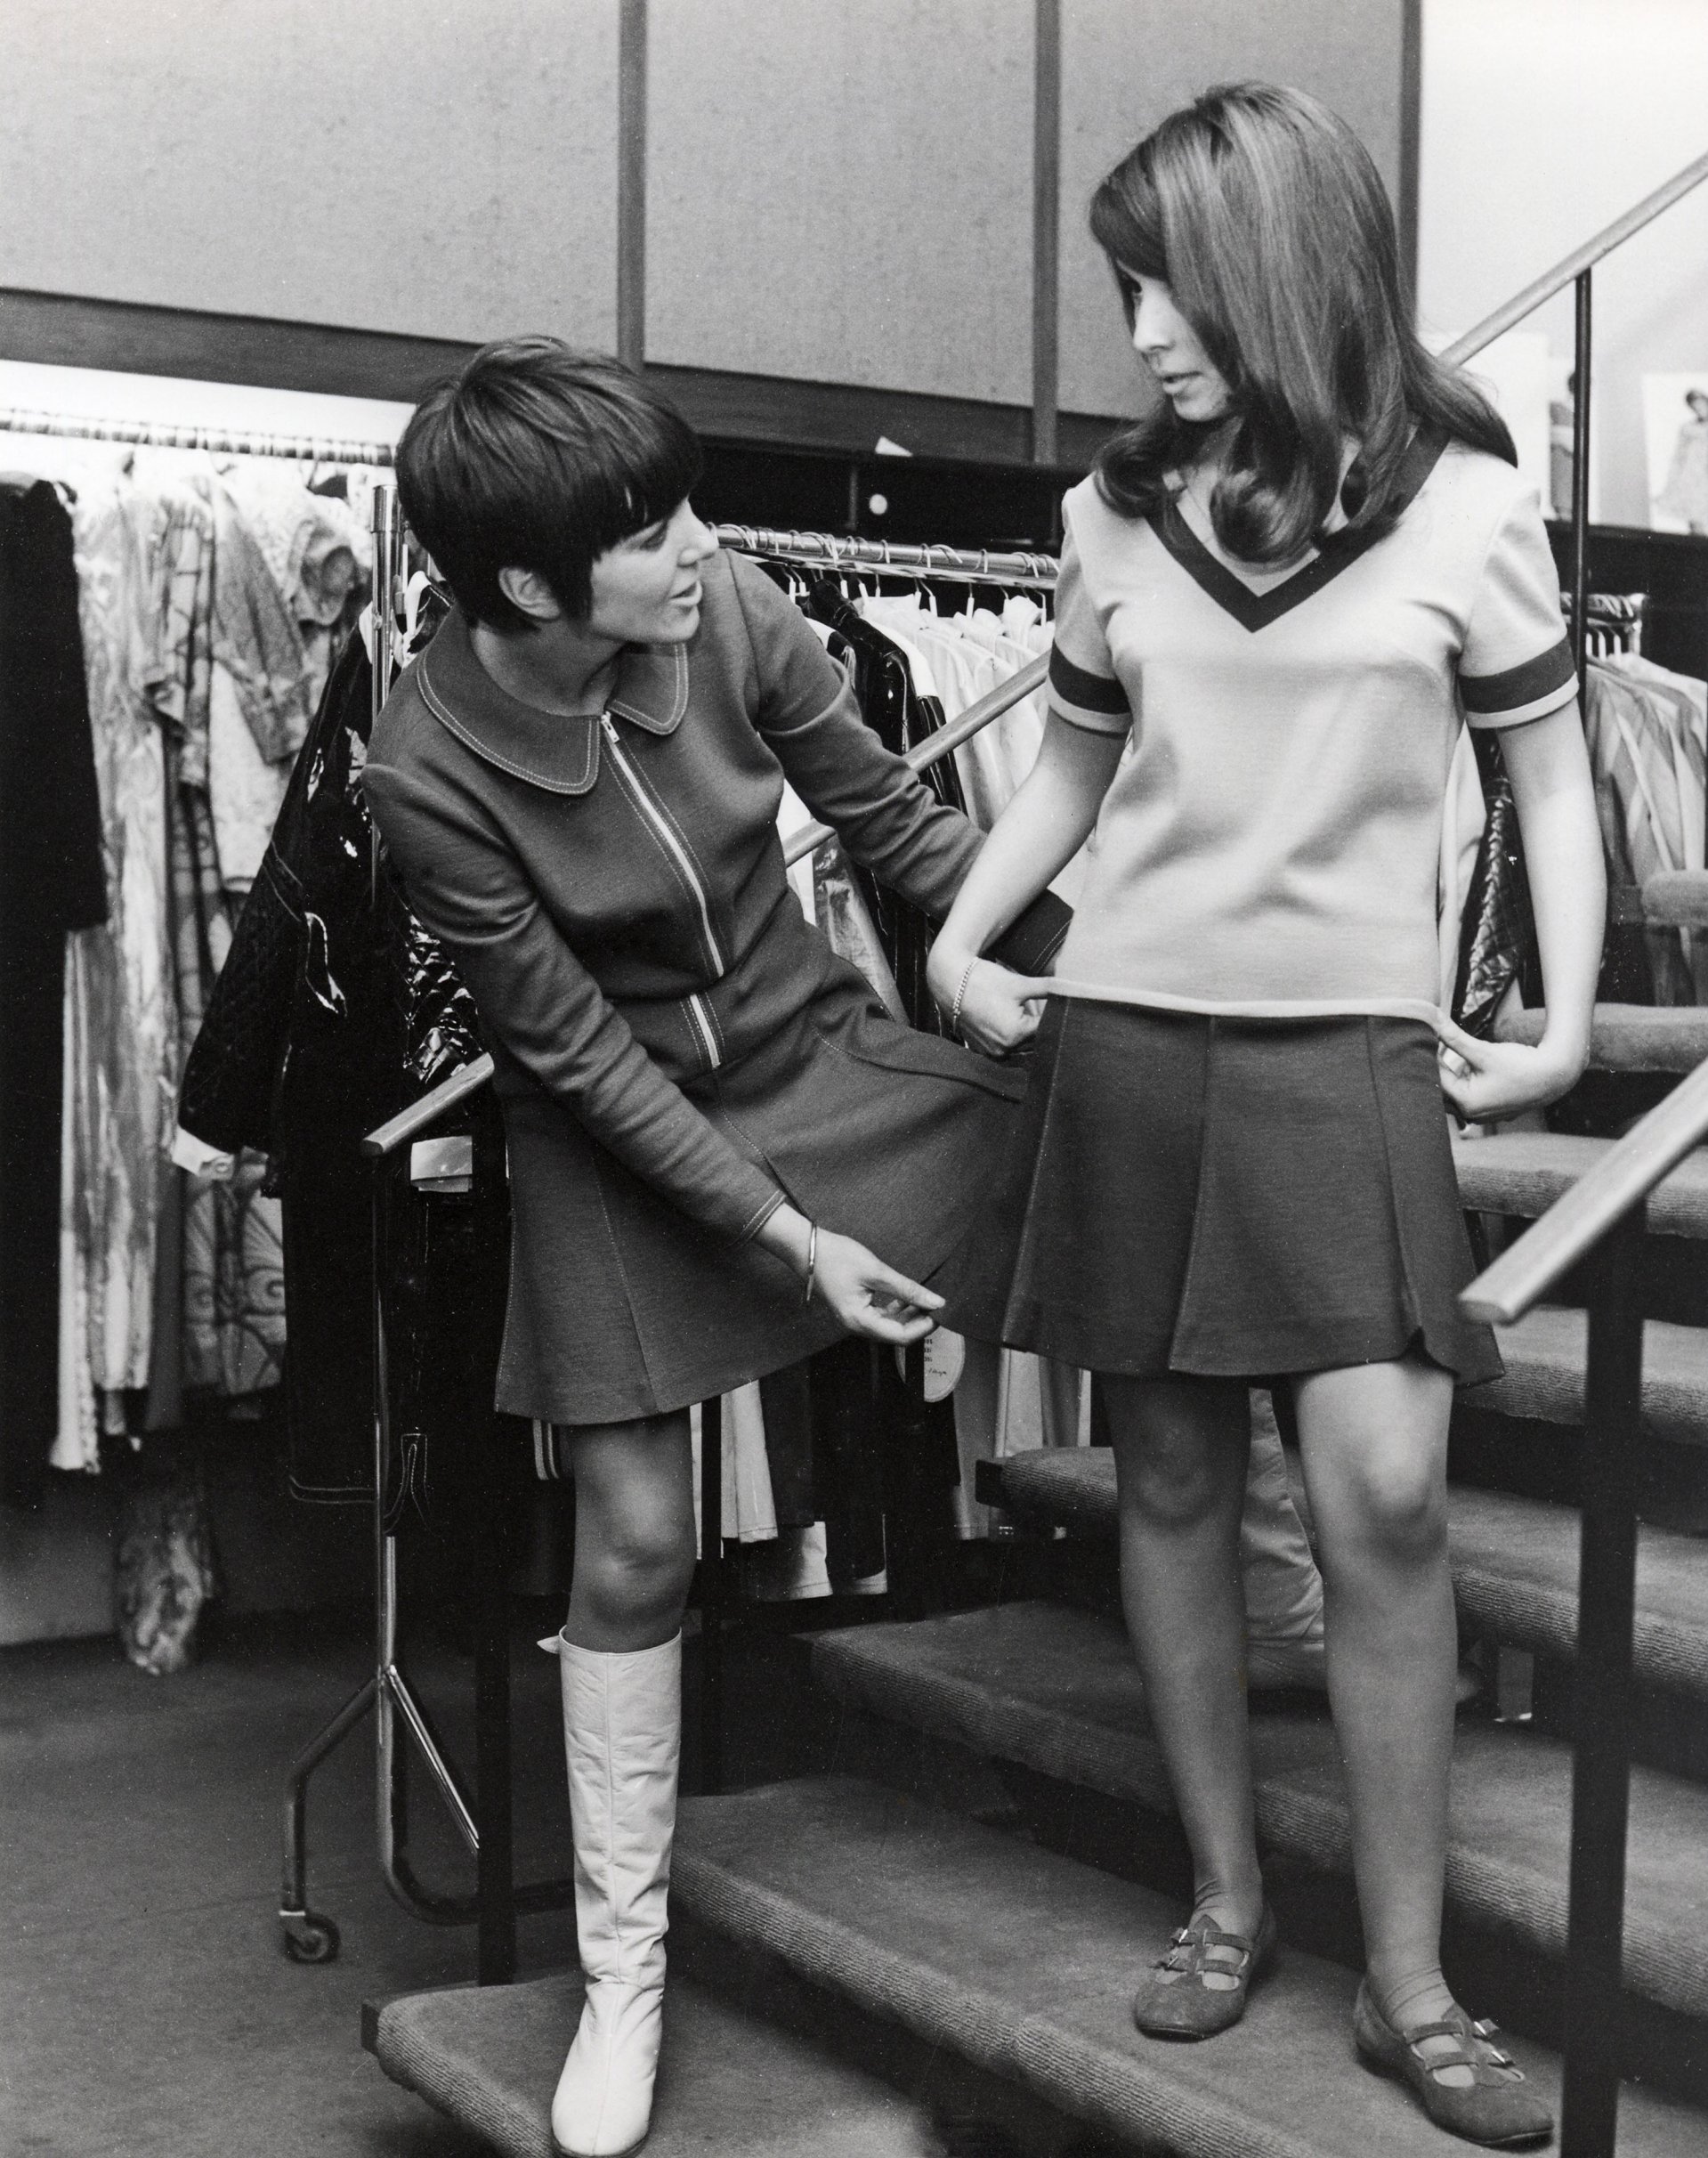 the first miniskirt in 1960s